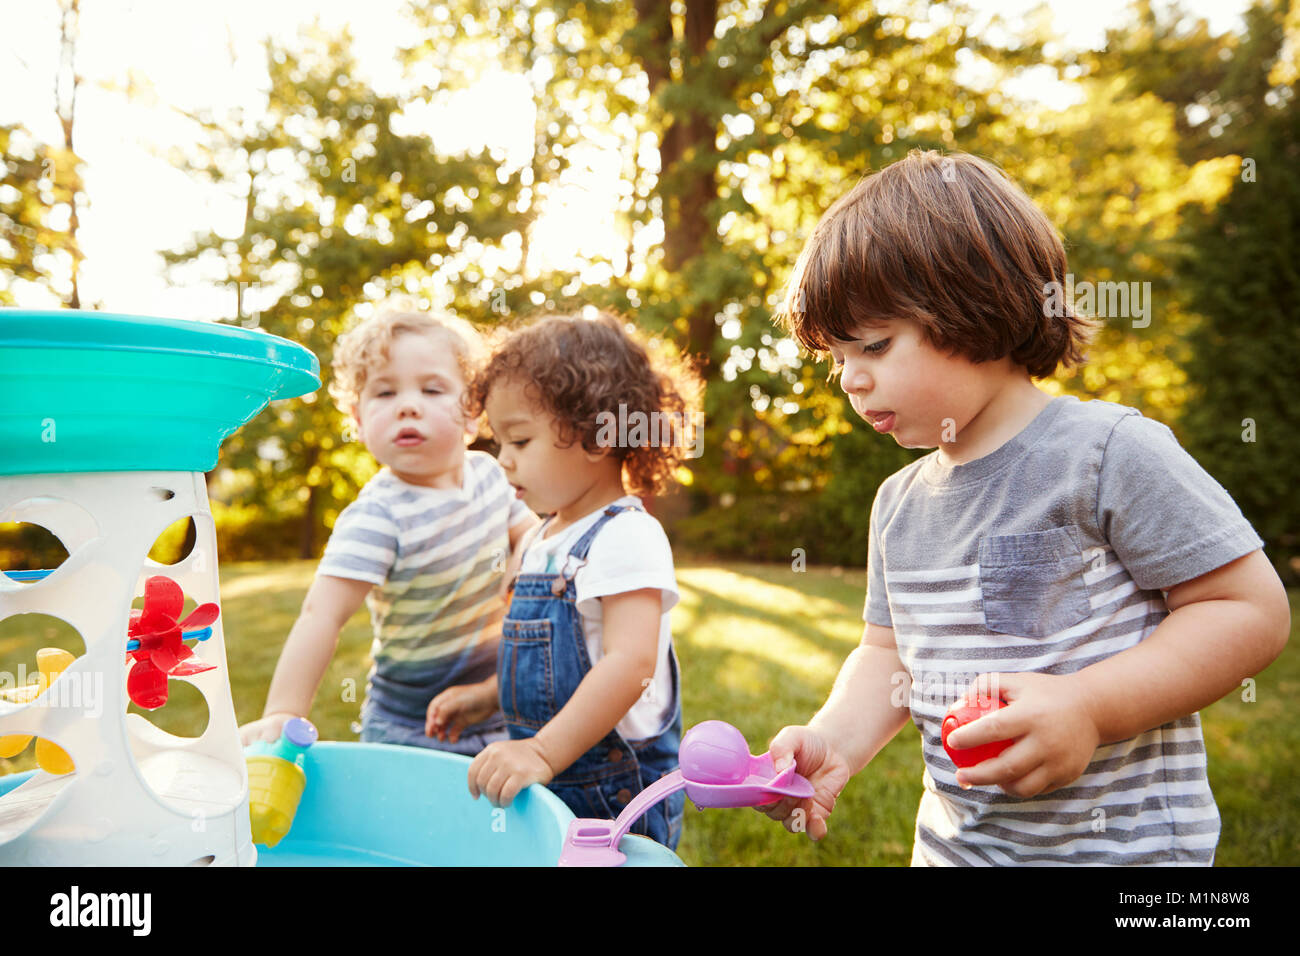 Group Of Young Children Playing With Water Table In Garden Stock Photo